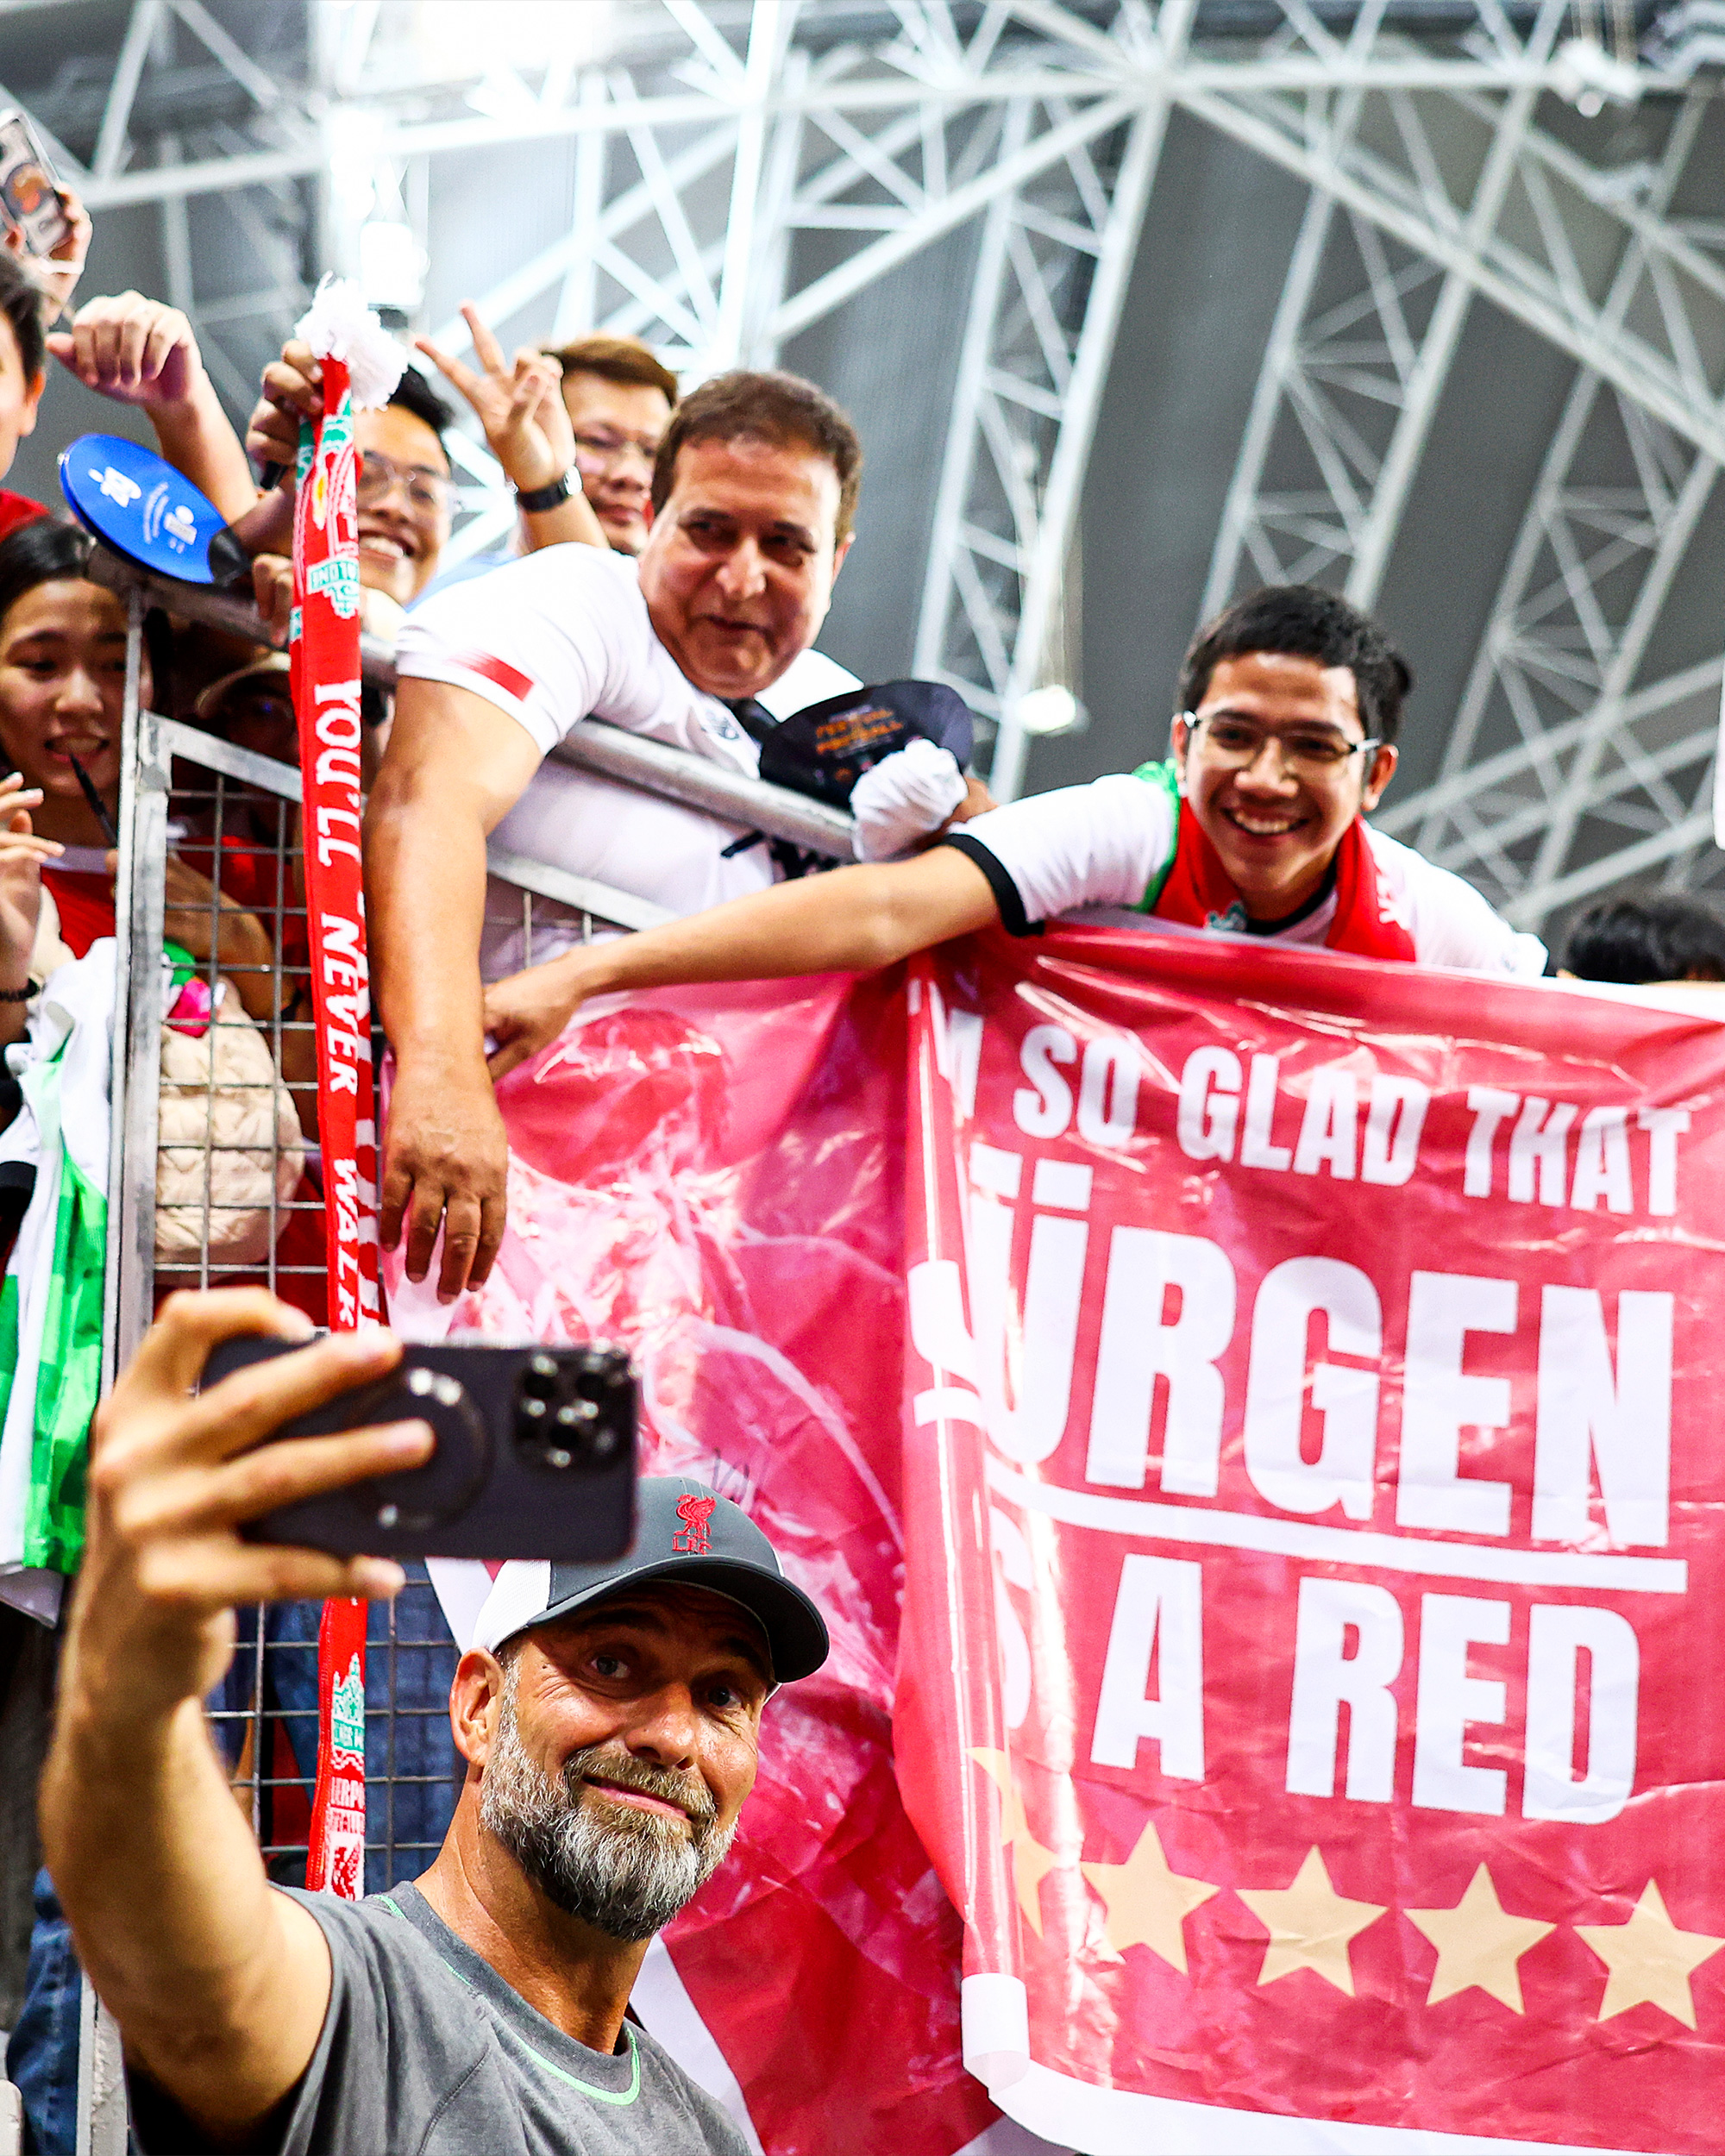 Jürgen Klopp poses for a photograph with fans that have a banner that reads "I'm so glad that Jürgen is a Red" 